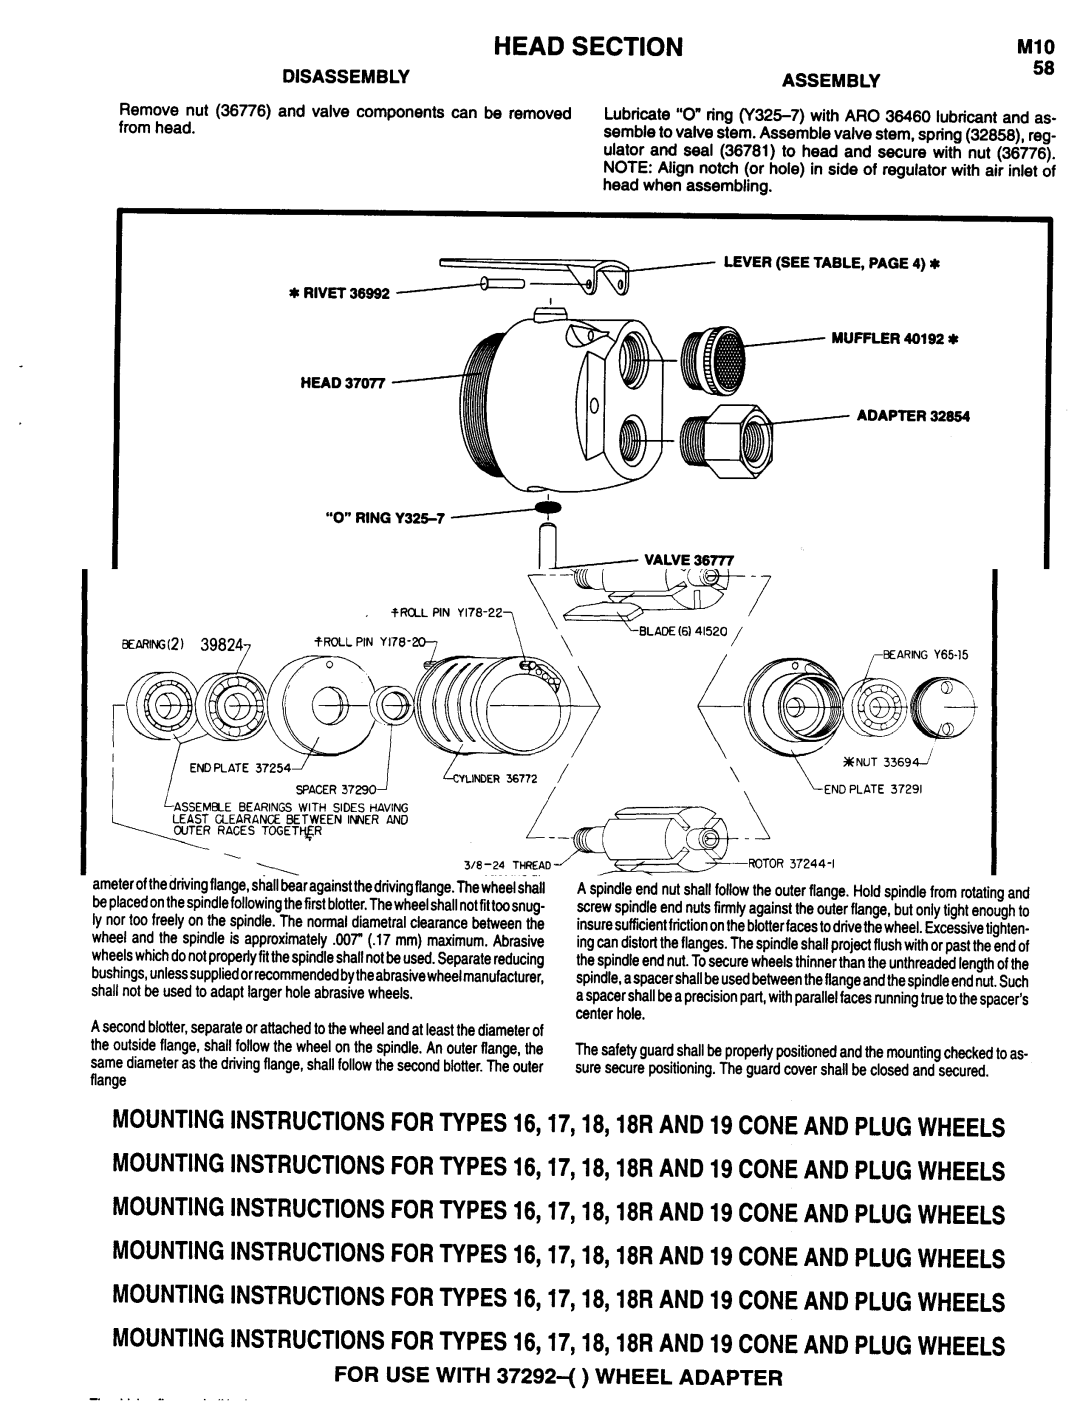 Ingersoll-Rand 7871-F-( ), 7870-F-( ) Head Section, Remove nut 36776 and valve components, From head, Head when assembling 